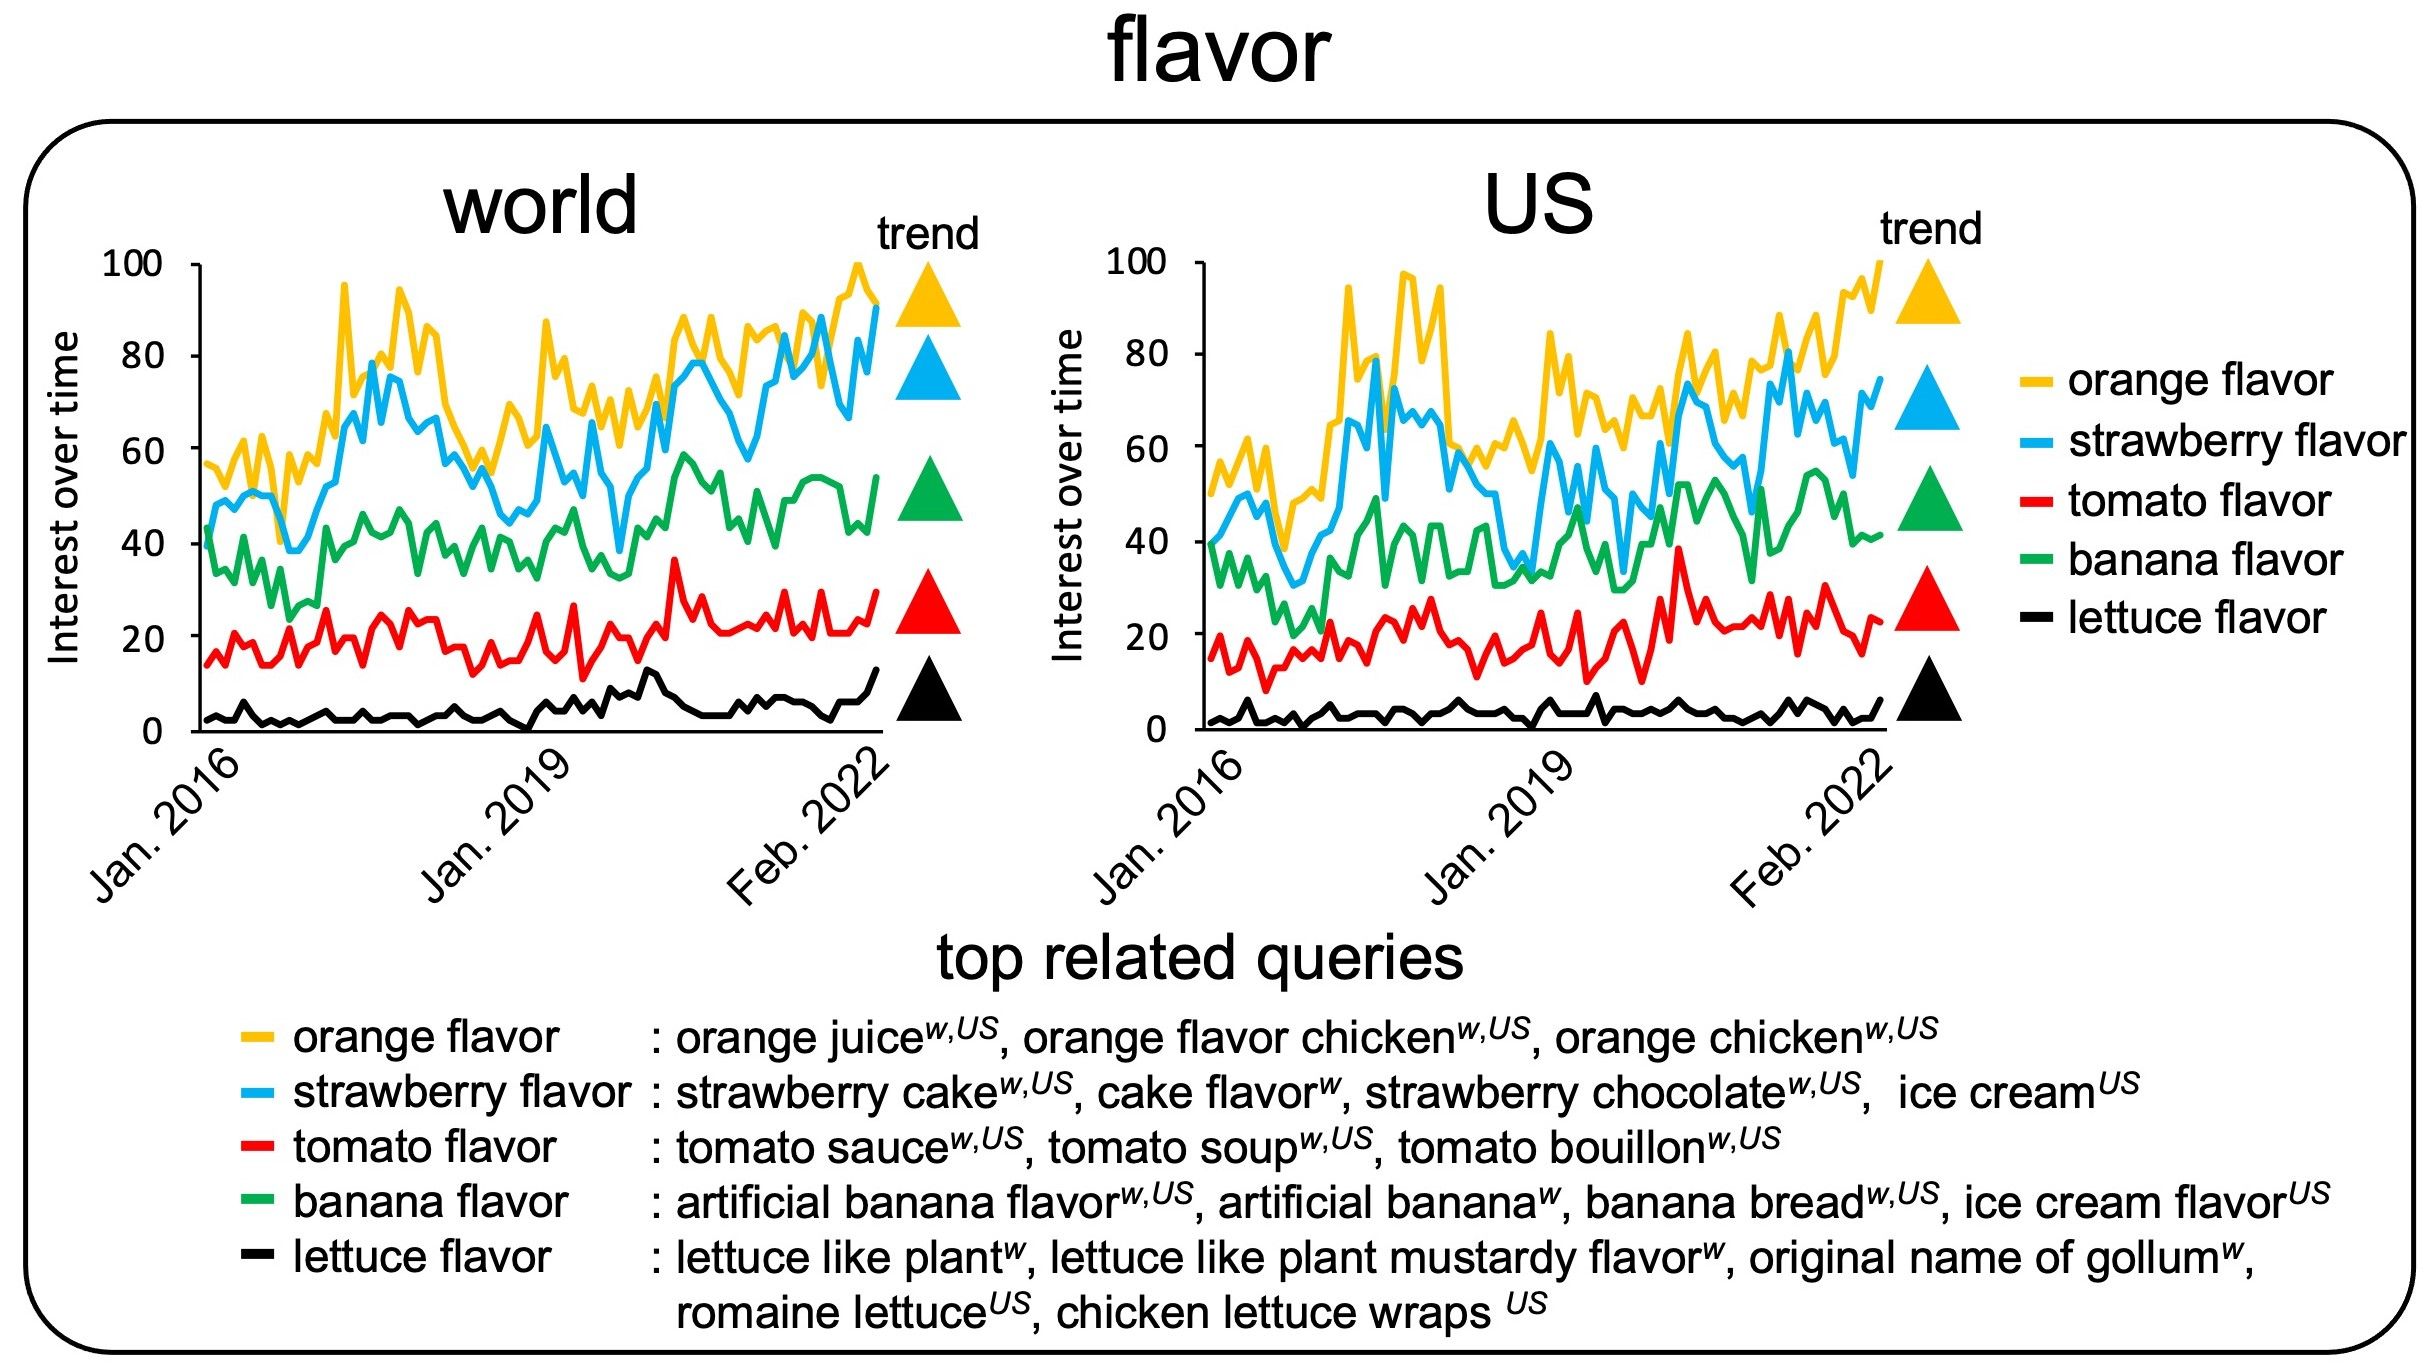 Search trends for “orange flavor,” “strawberry flavor,” “tomato flavor,” “banana flavor,” and “lettuce flavor.” Ascending or descending triangles are shown if the change in search interest was statistically significant. Each triangle is color-coded based on the figure legend. Superscripts w and US indicate the top related queries in the world and the US, respectively.